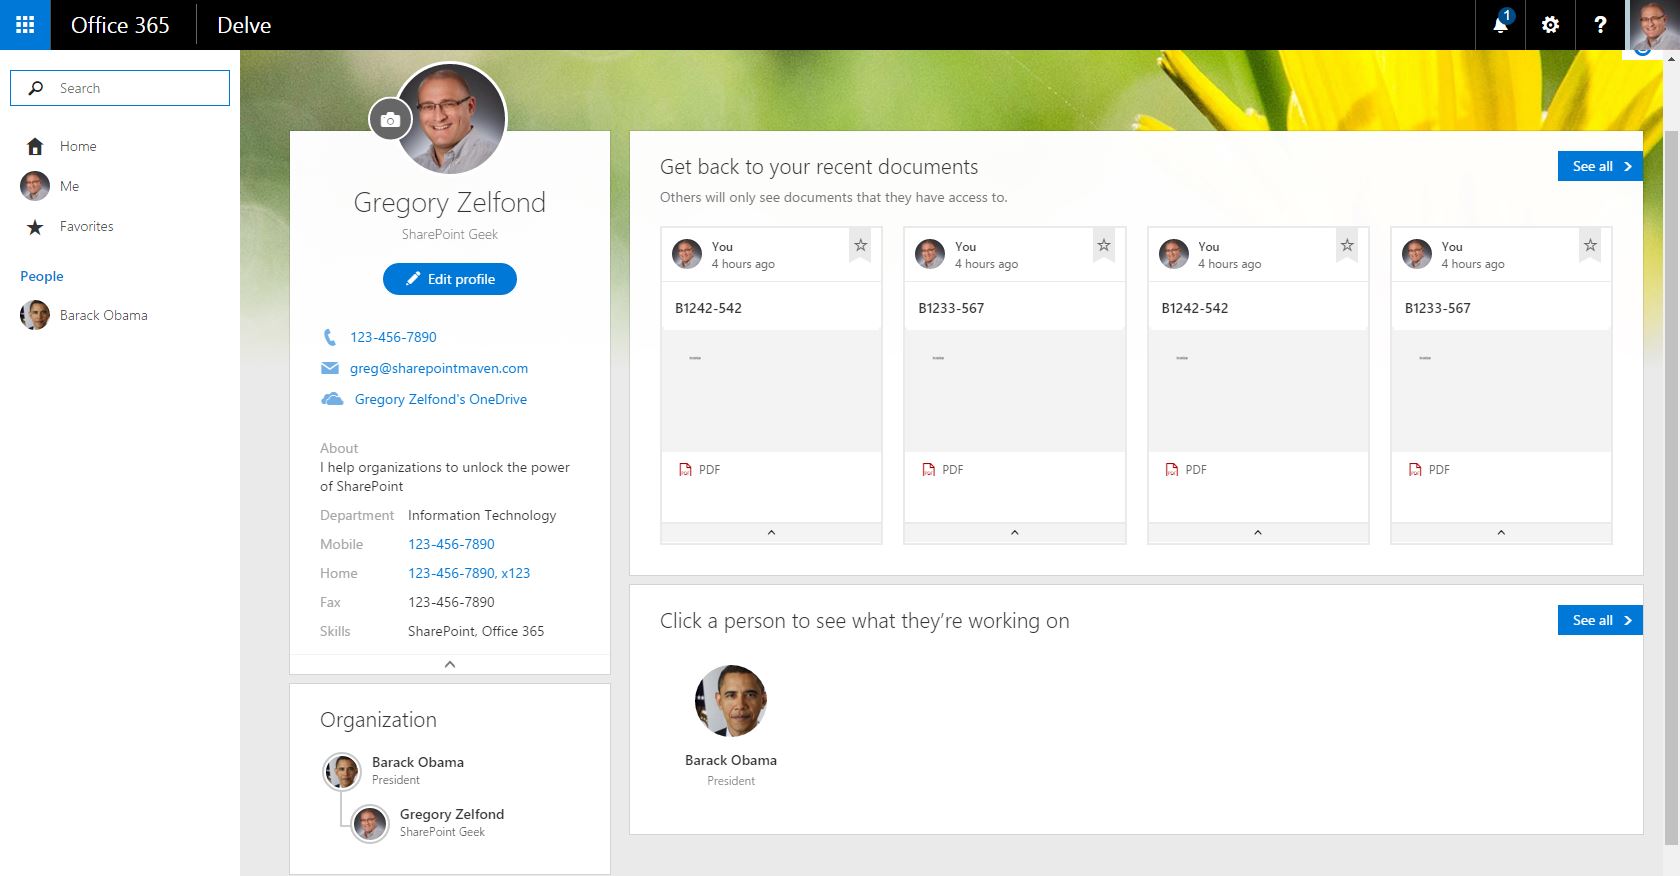 How to create an Employee Directory in Sharepoint - SharePoint Maven